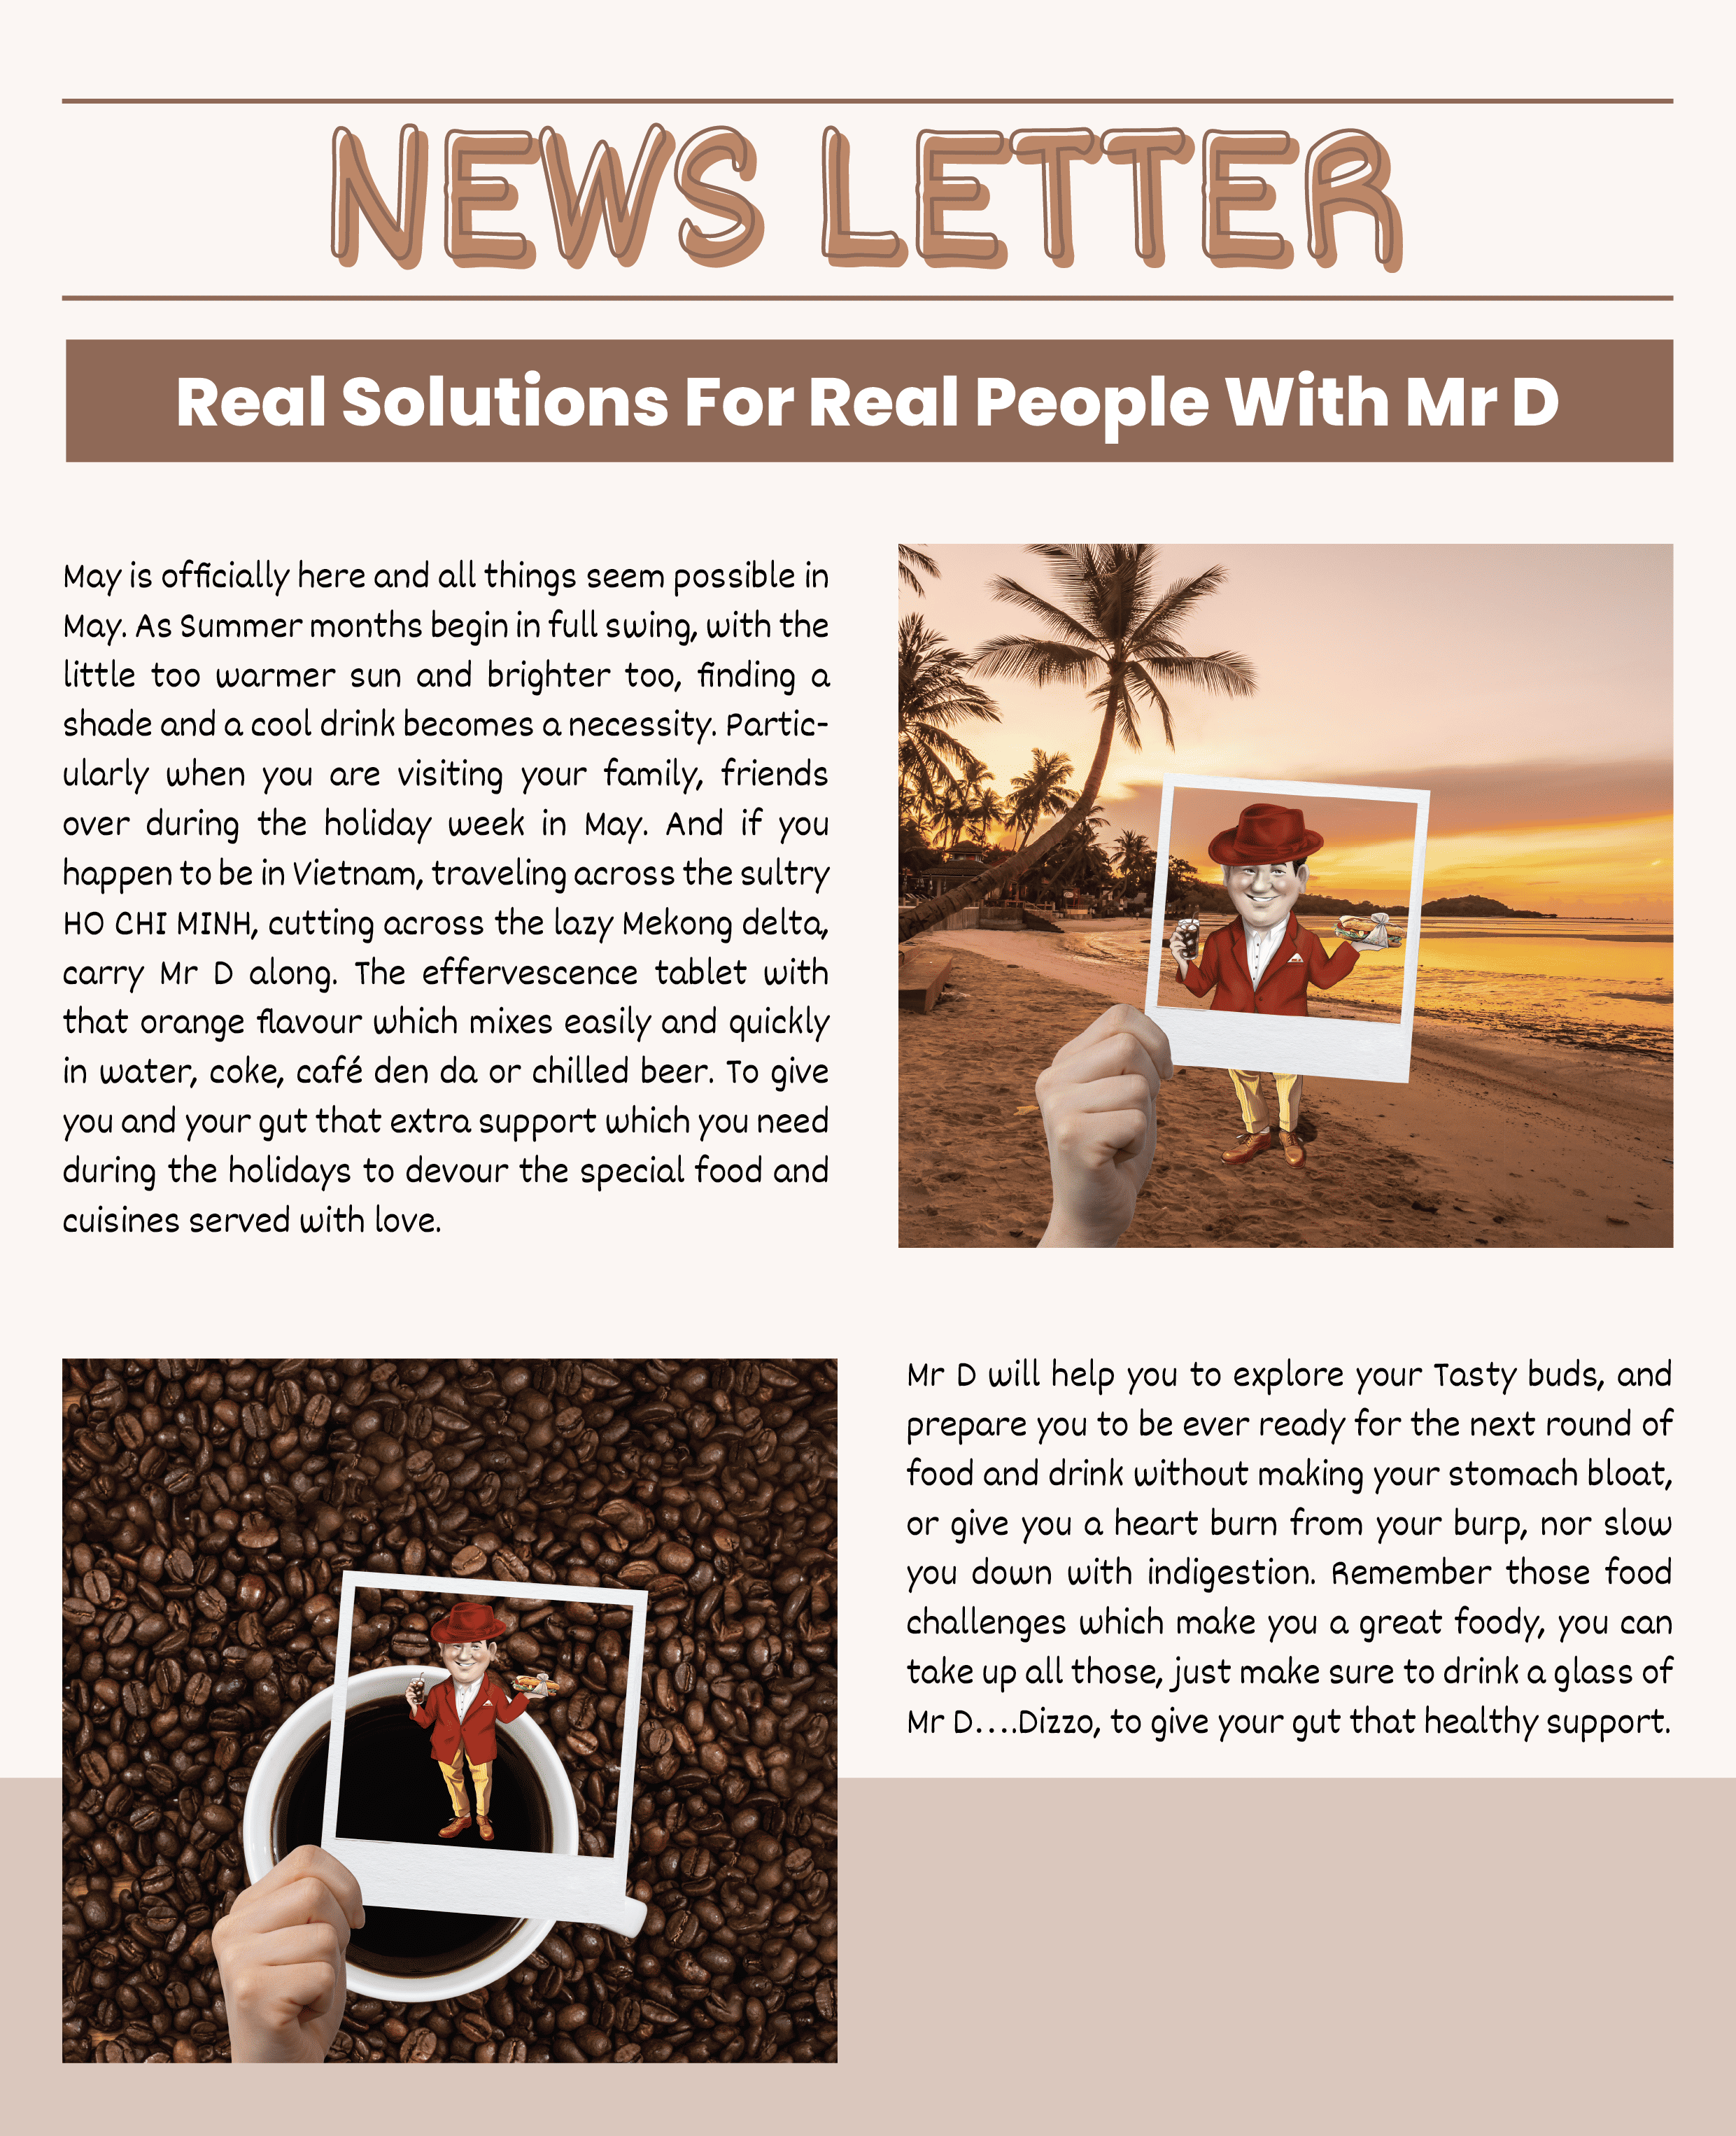 REAL SOLUTIONS FOR REAL PEOPLE WITH MR. D